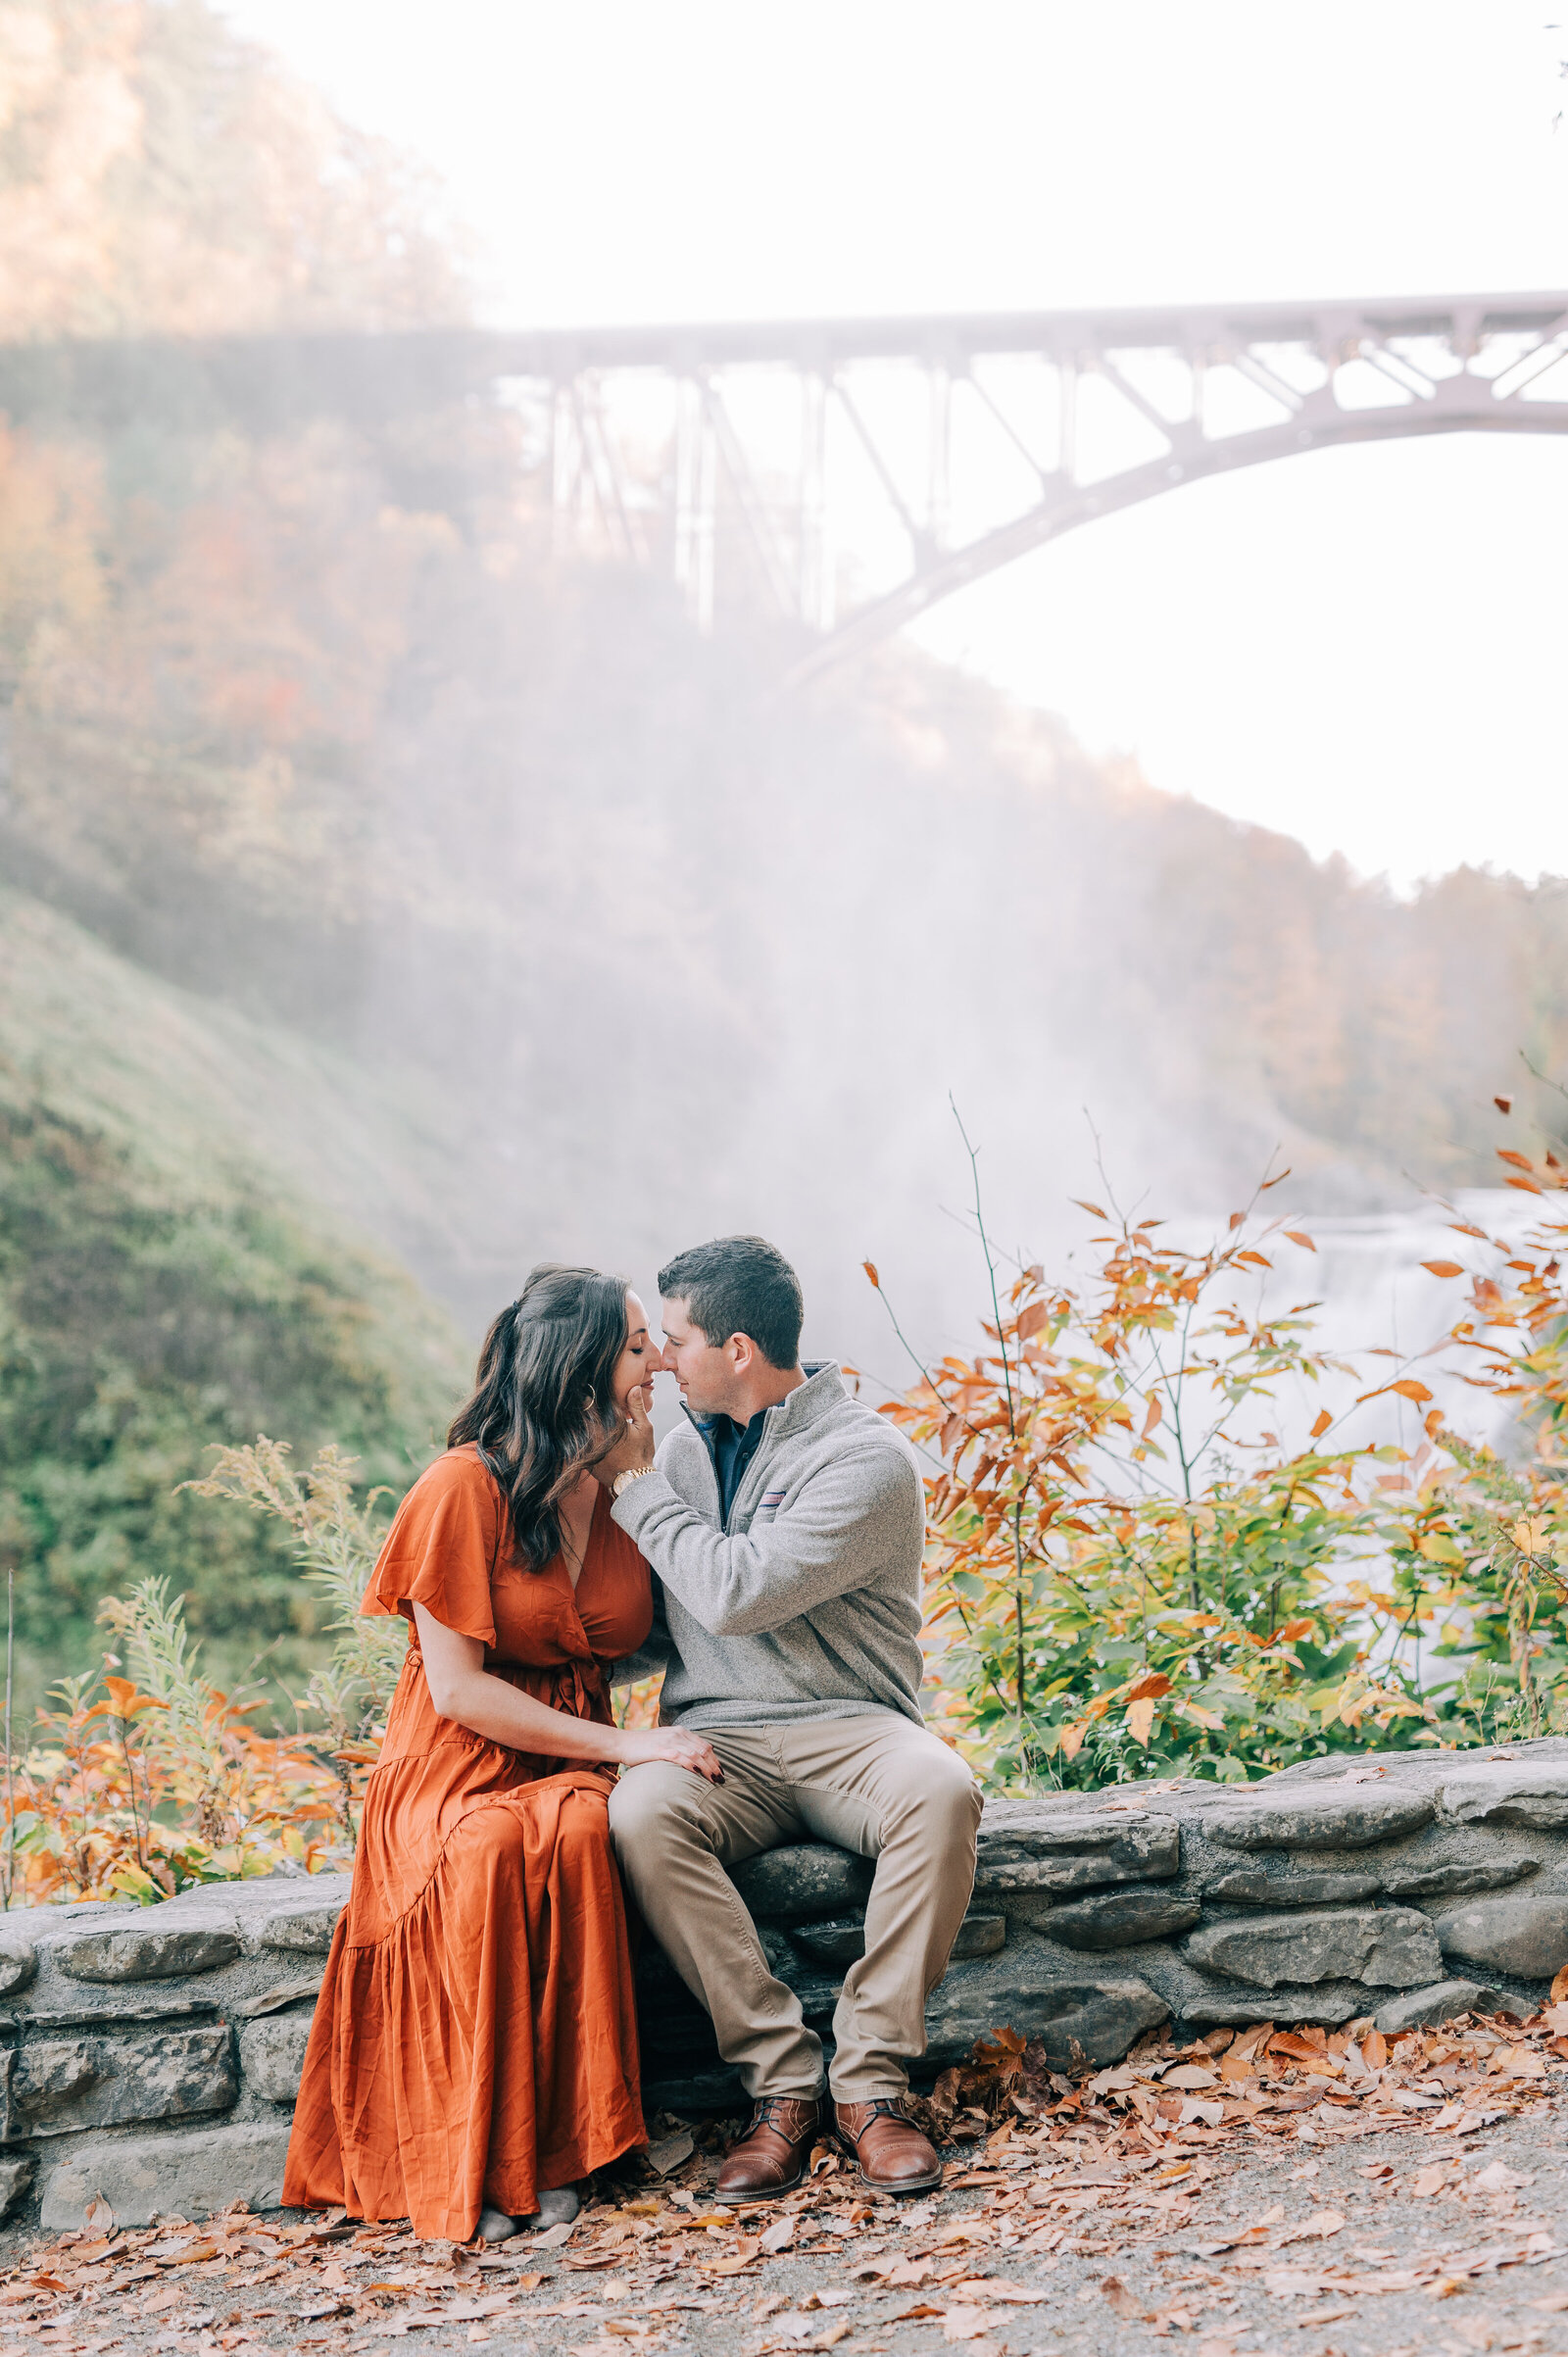 Waterfall at letchworth state park engagement session